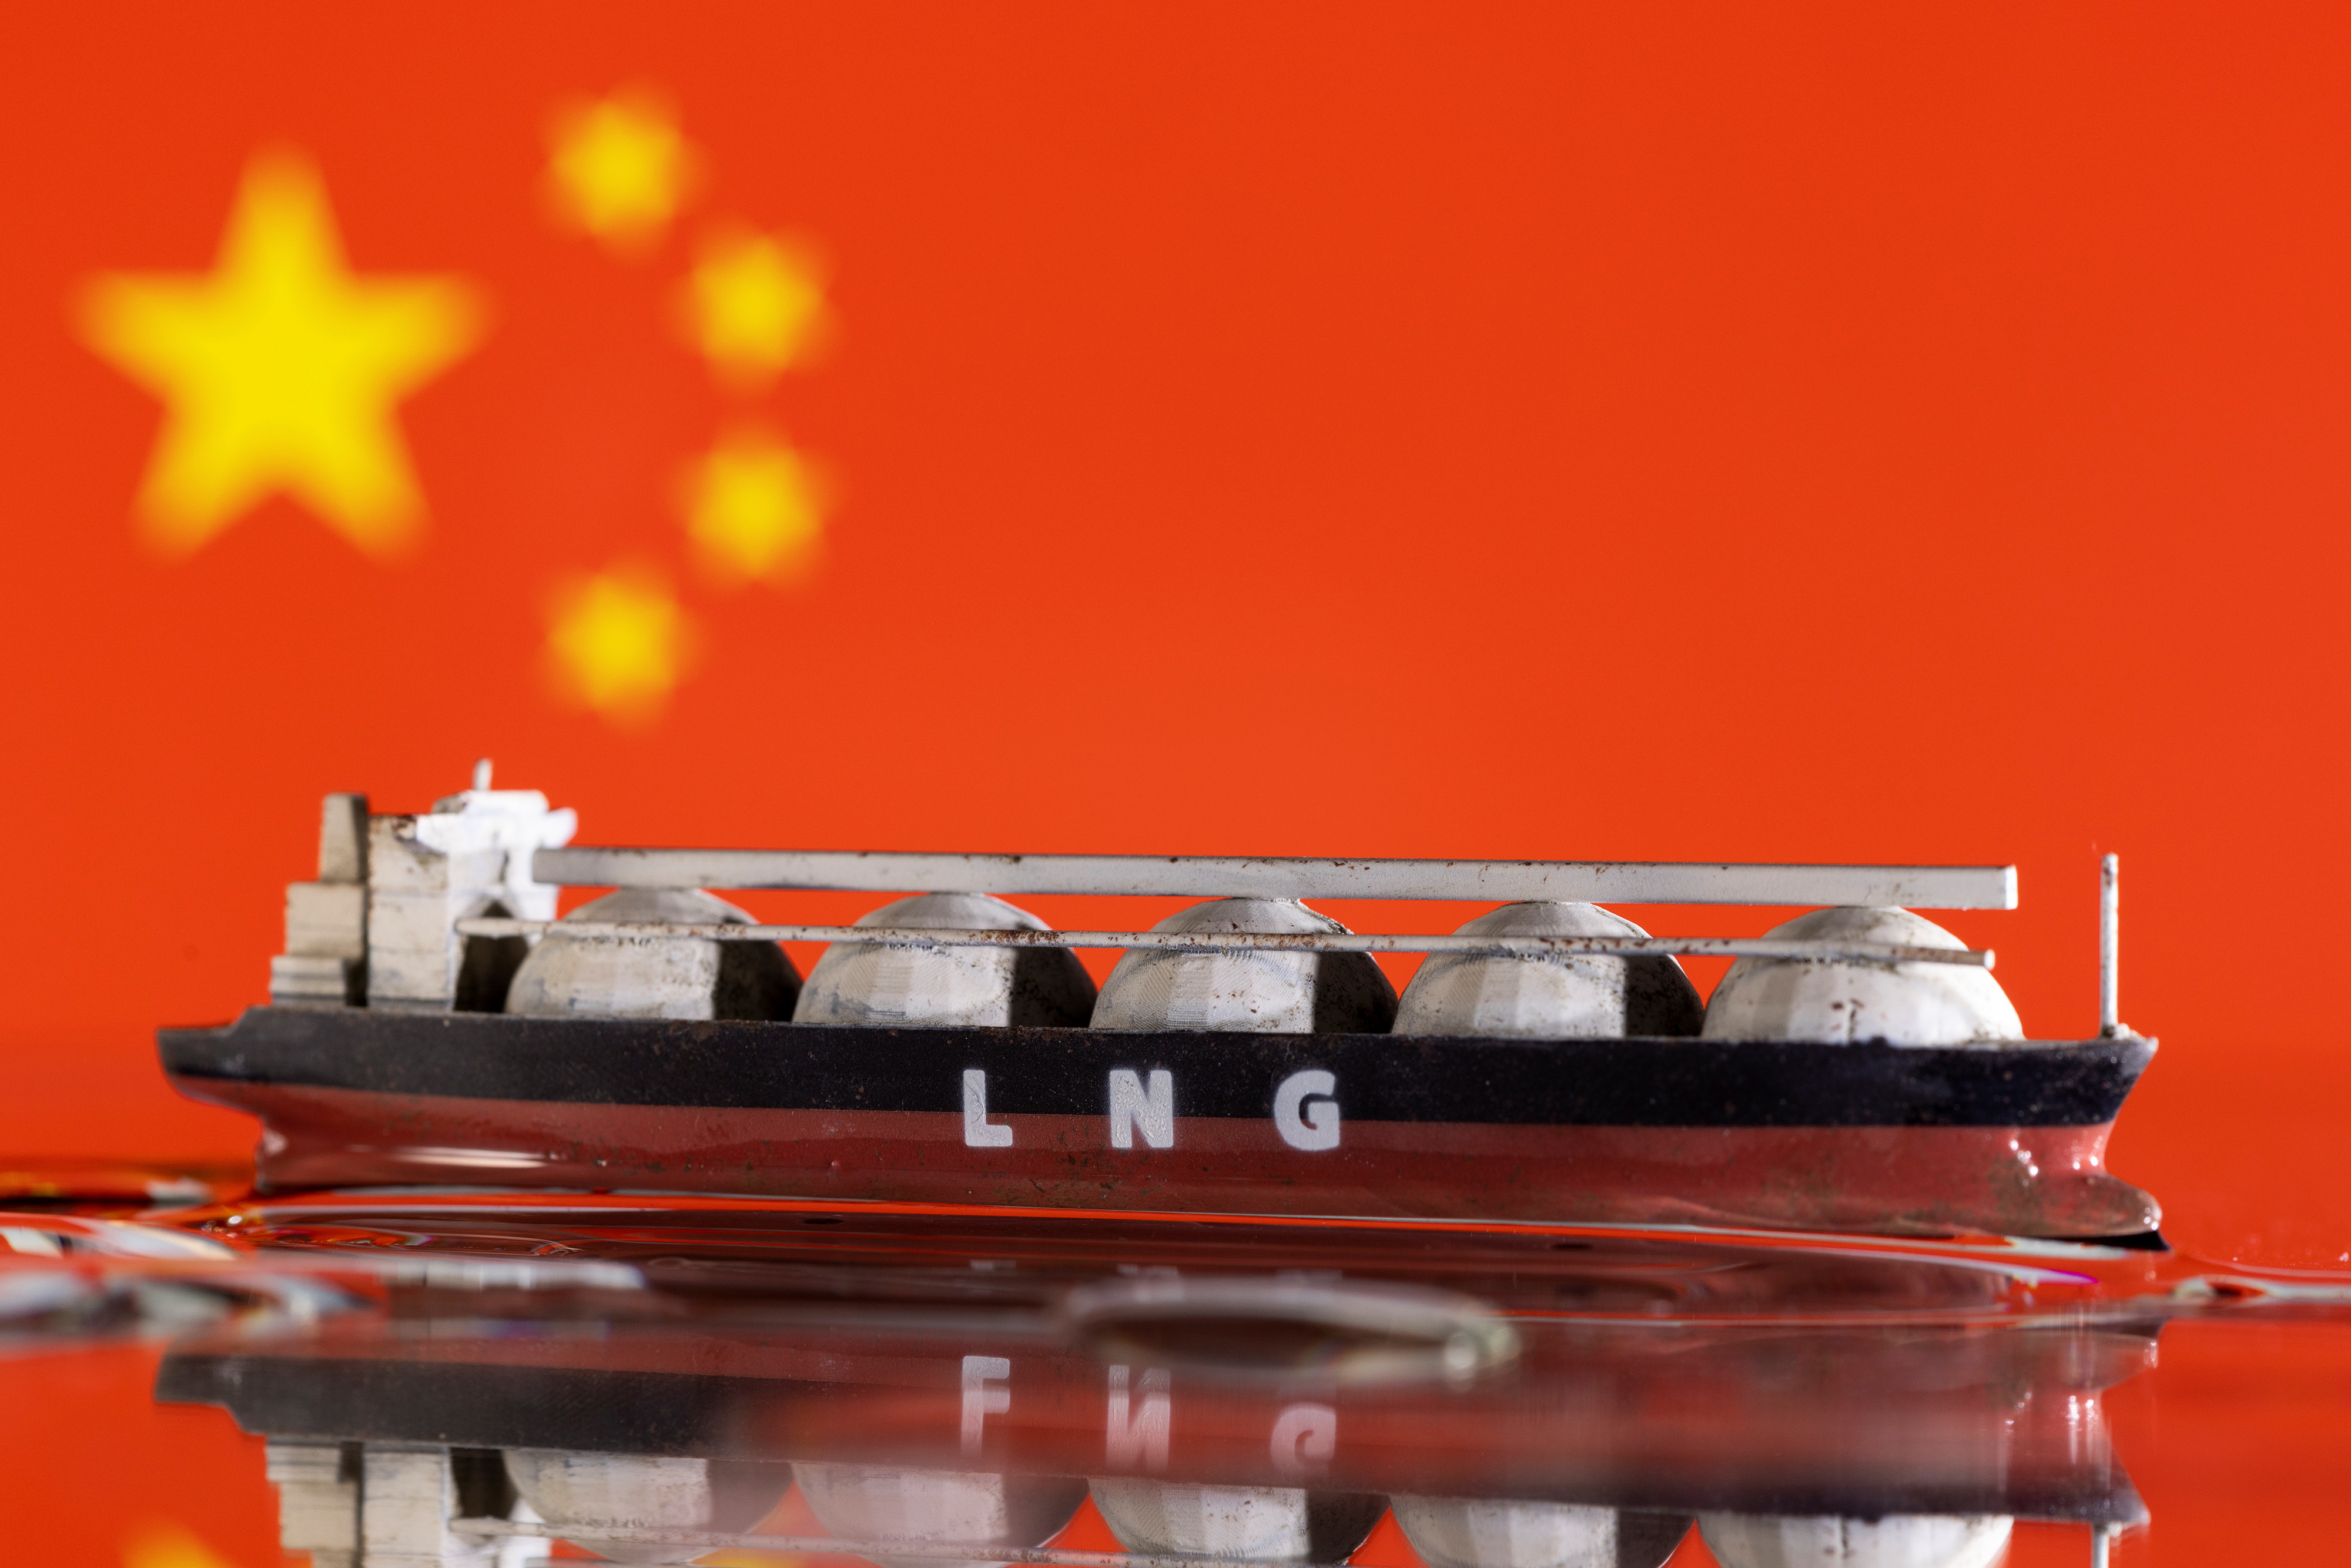 Illustration shows model of LNG tanker and China's flag